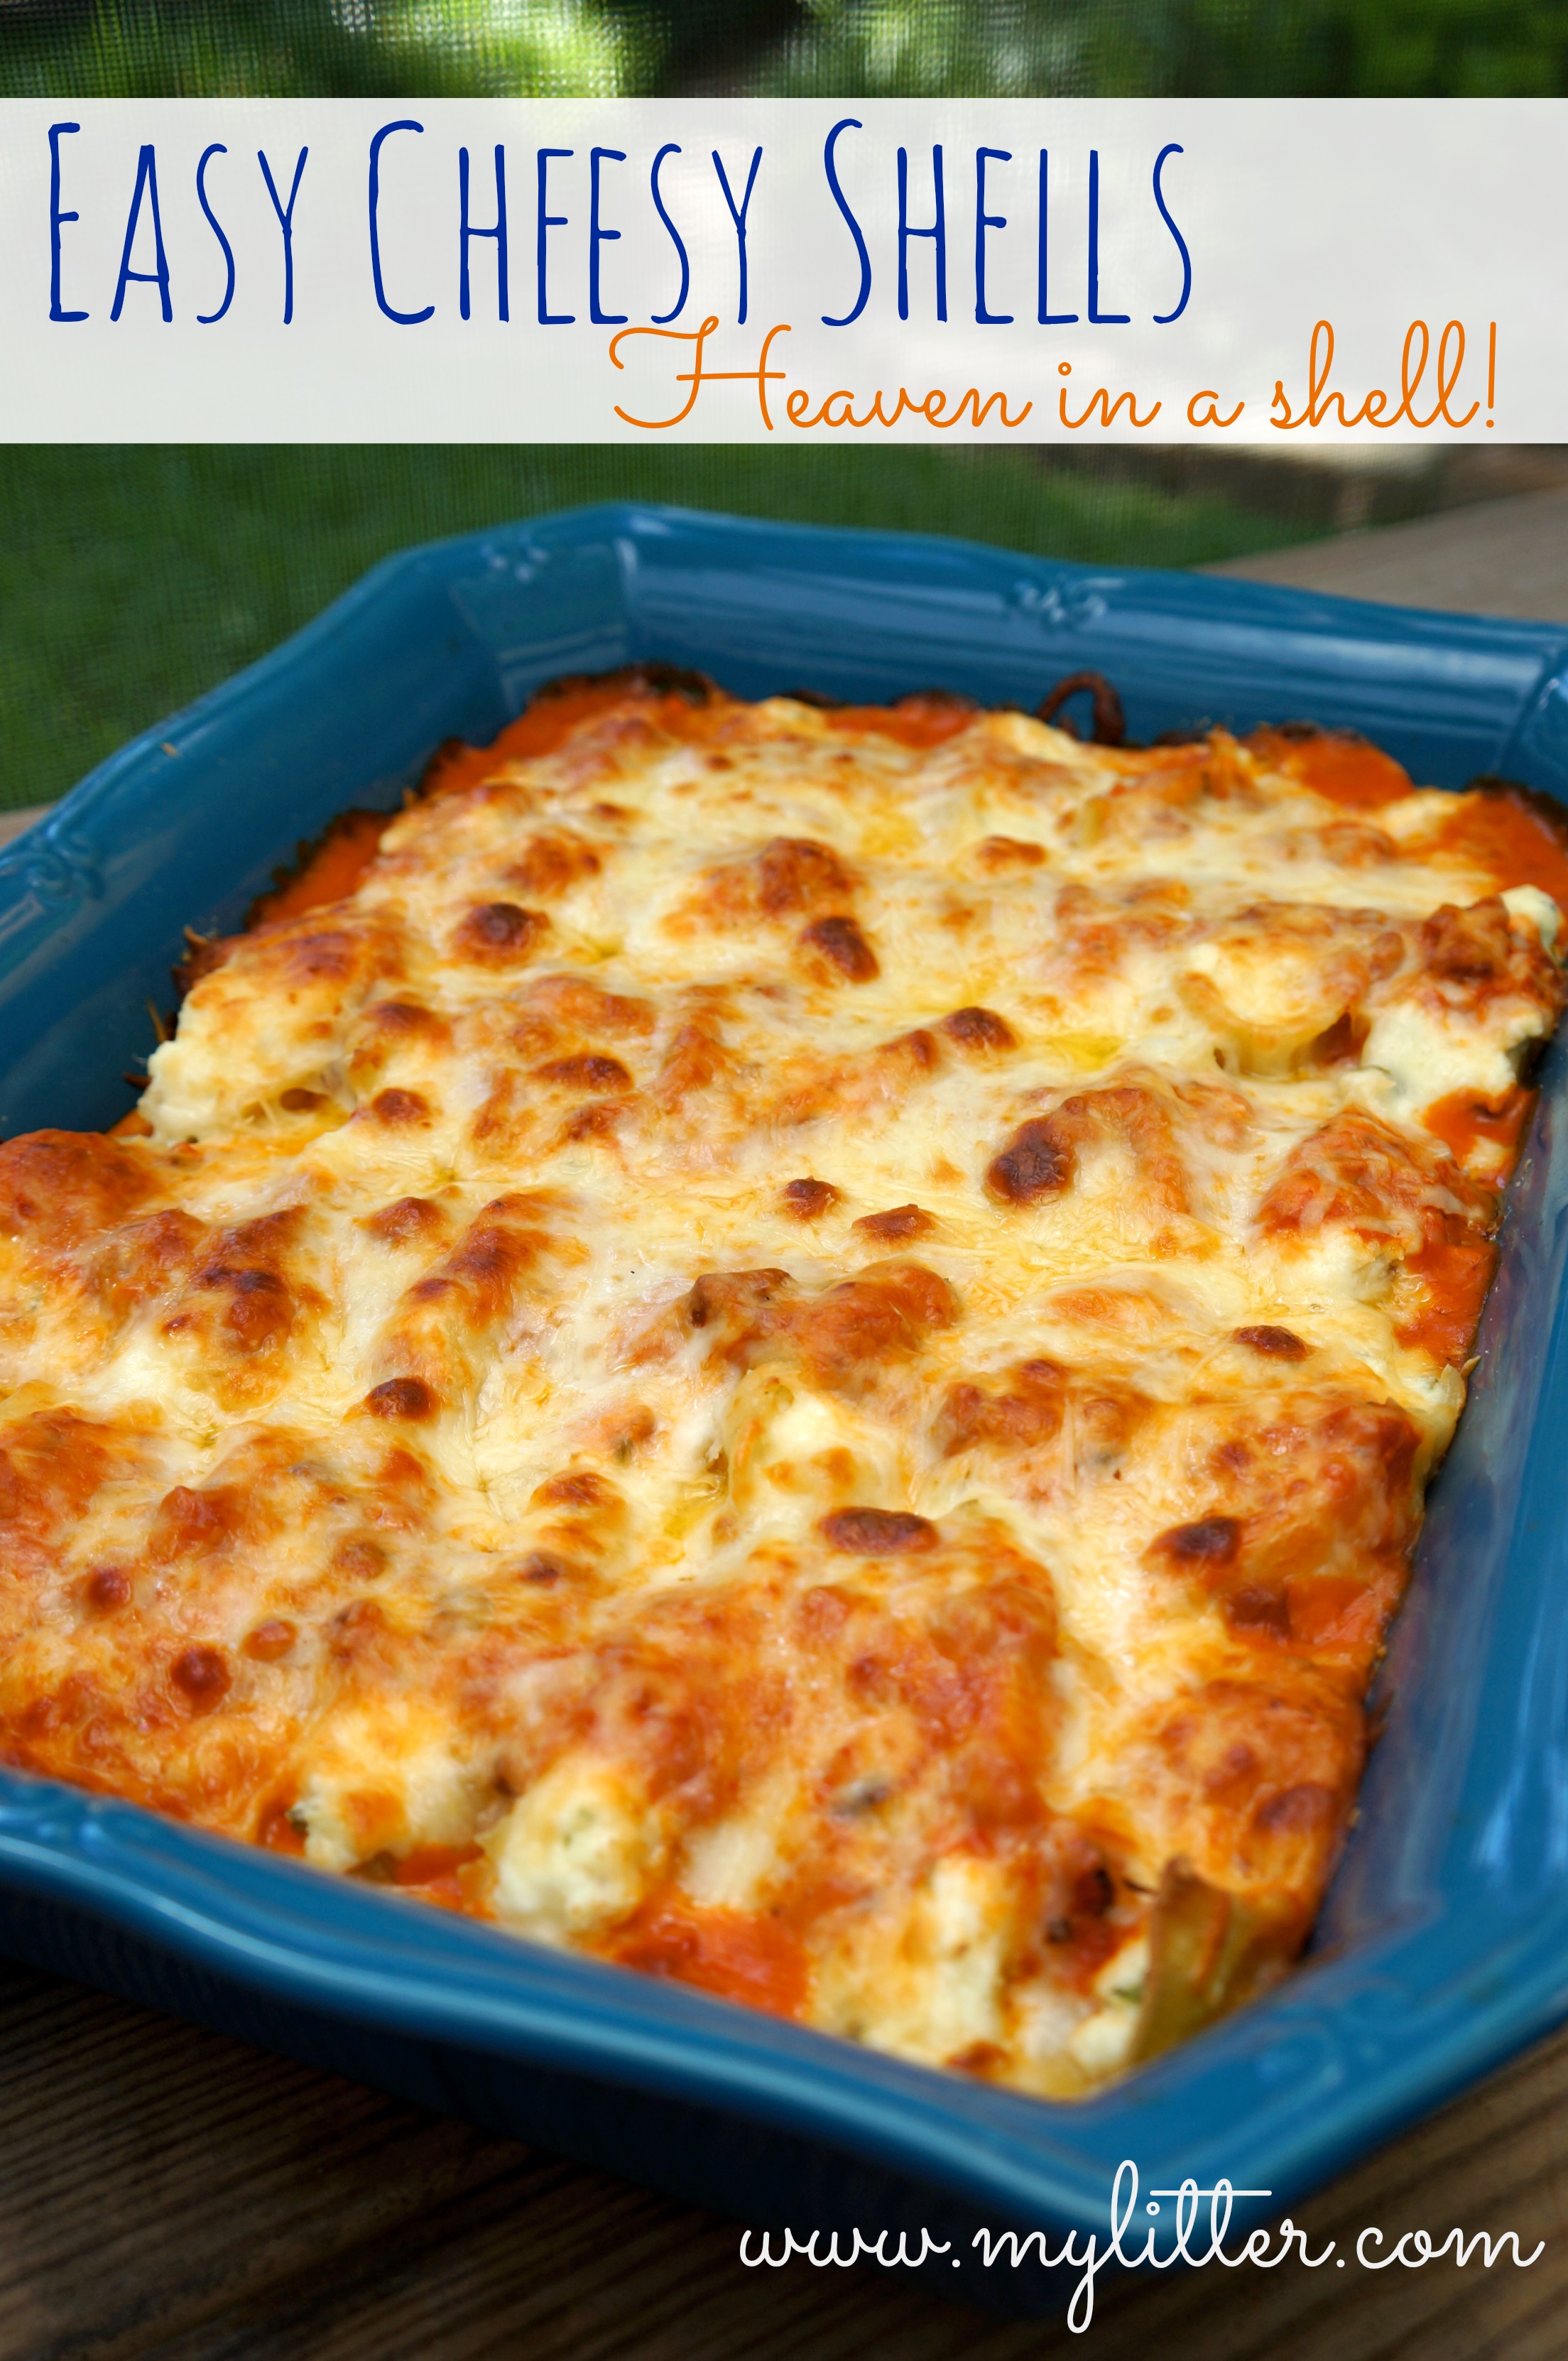 Easy Cheesy Shells - Ricotta Stuffed Shells - MyLitter - One Deal At A Time